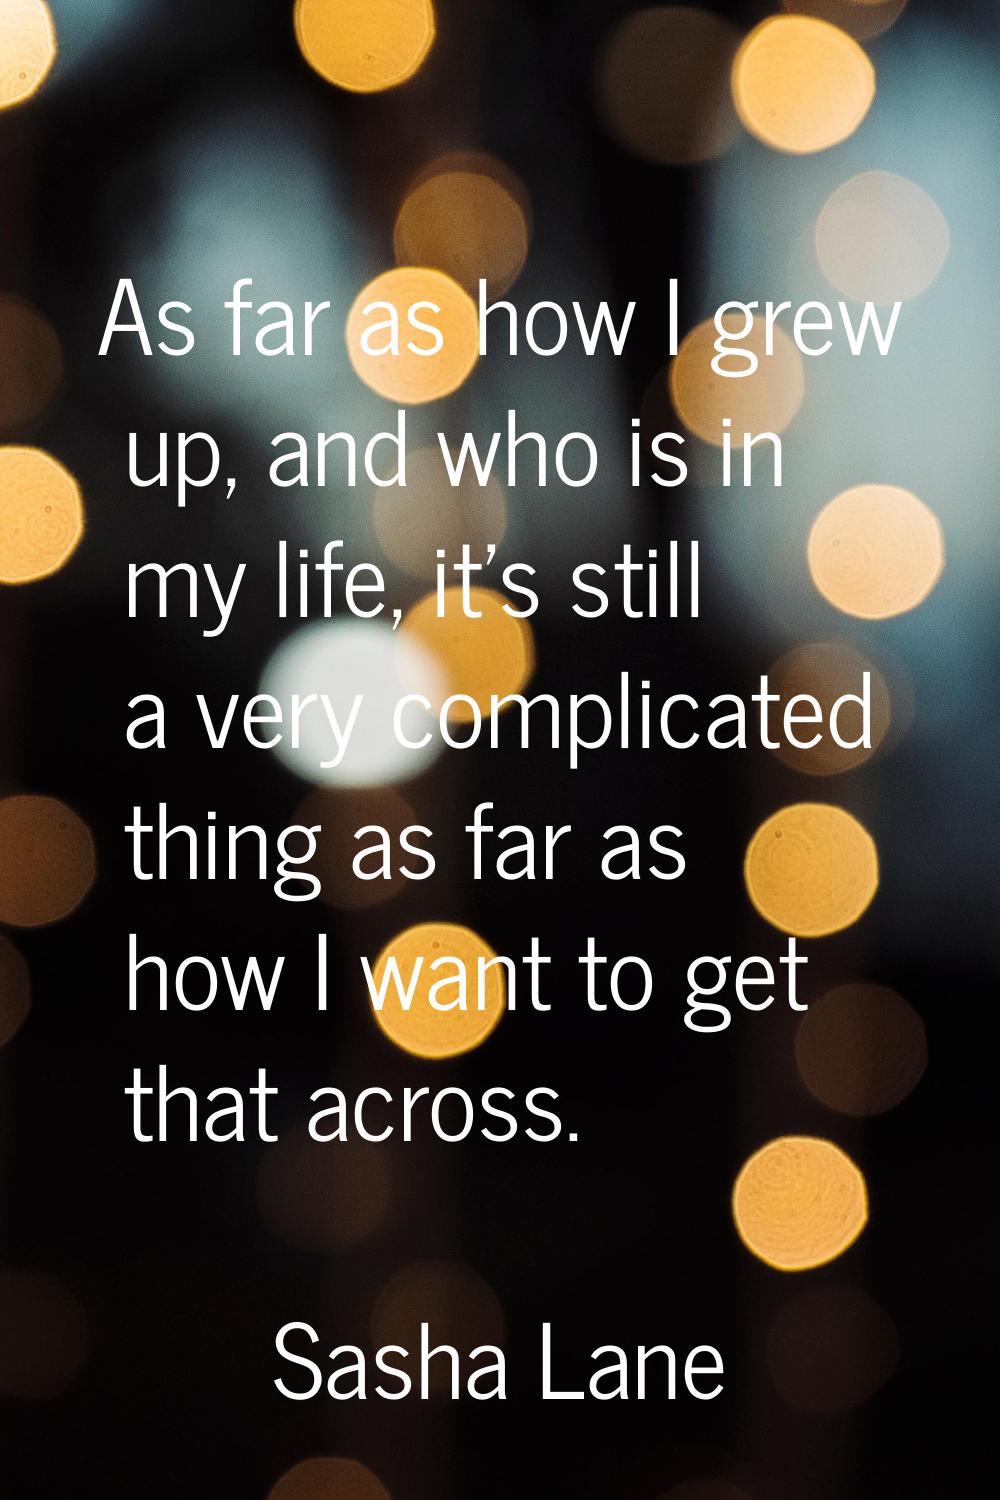 As far as how I grew up, and who is in my life, it's still a very complicated thing as far as how I